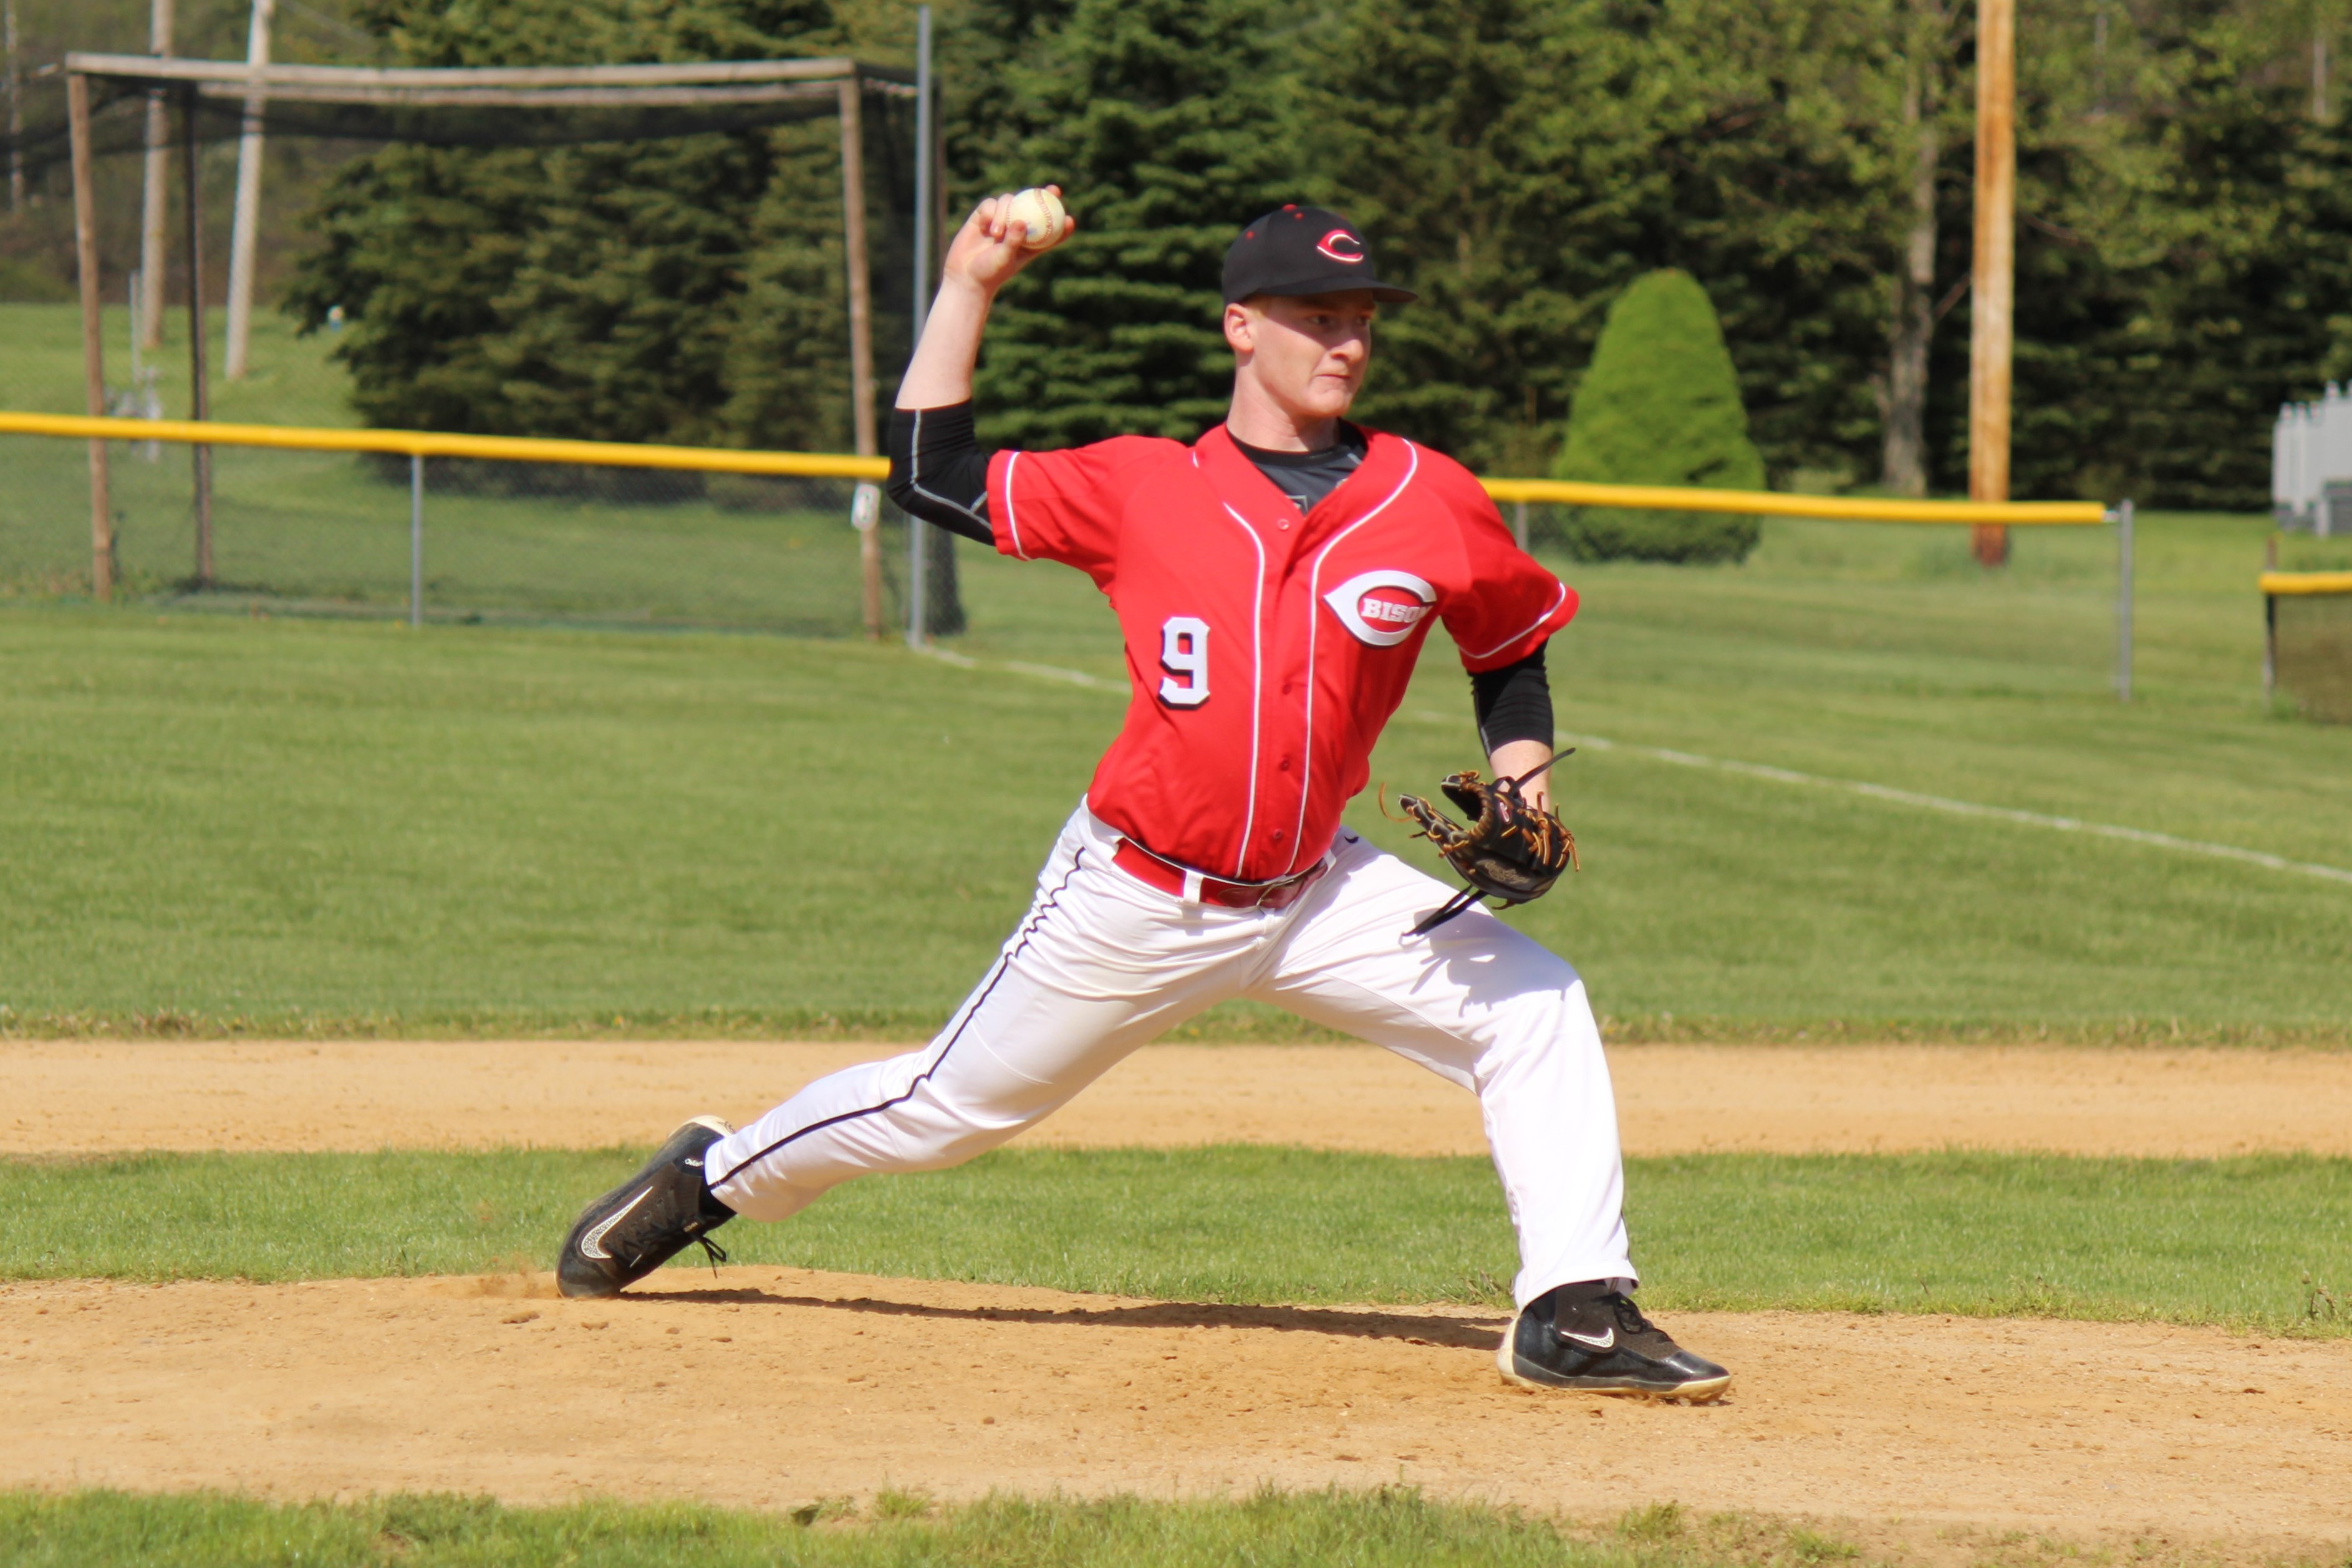 Jake Sorbera pitched the entire game, giving up three hits and striking out five.